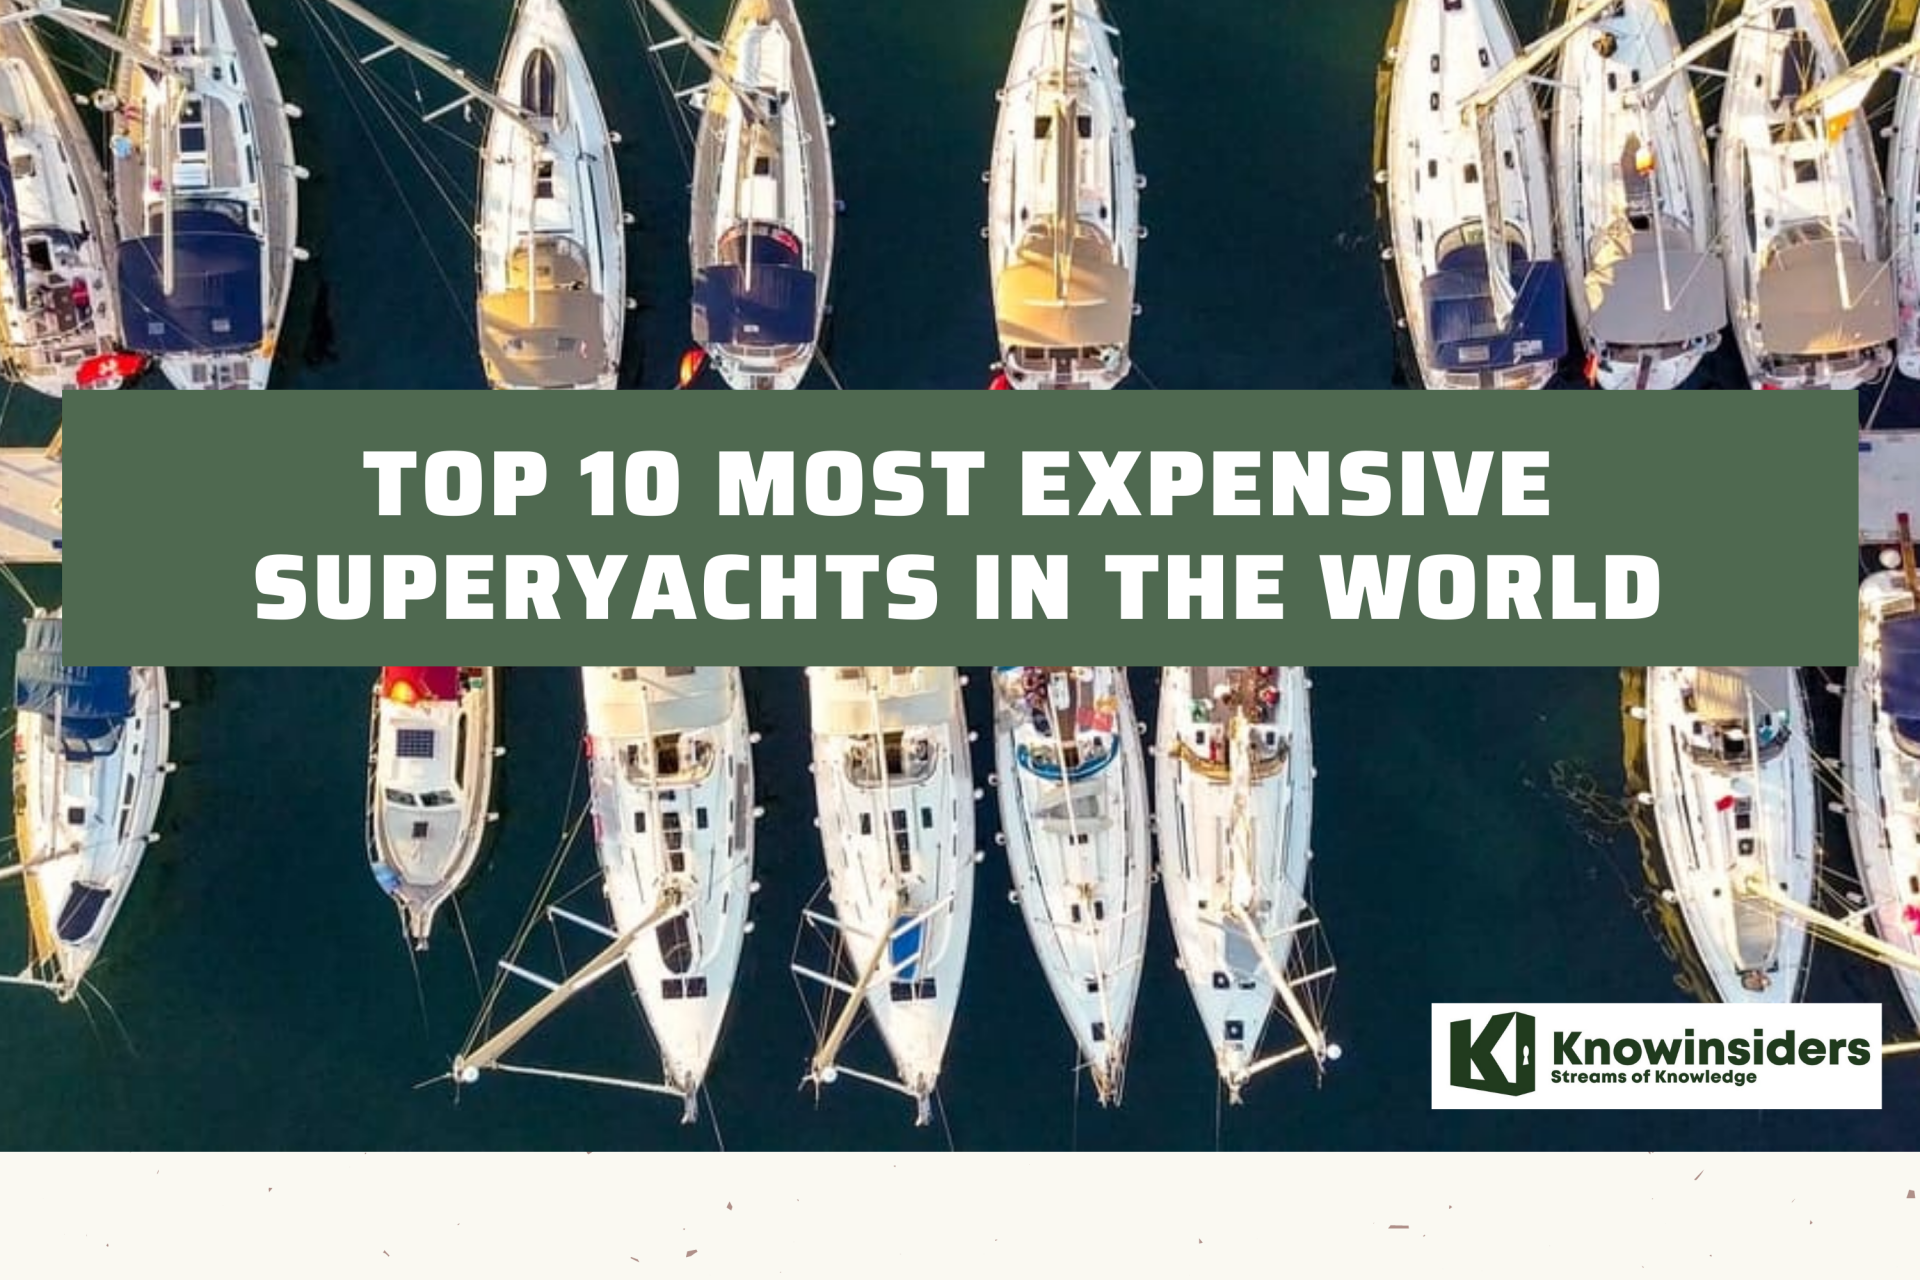 Top 10 Most Expensive Superyachts In the World